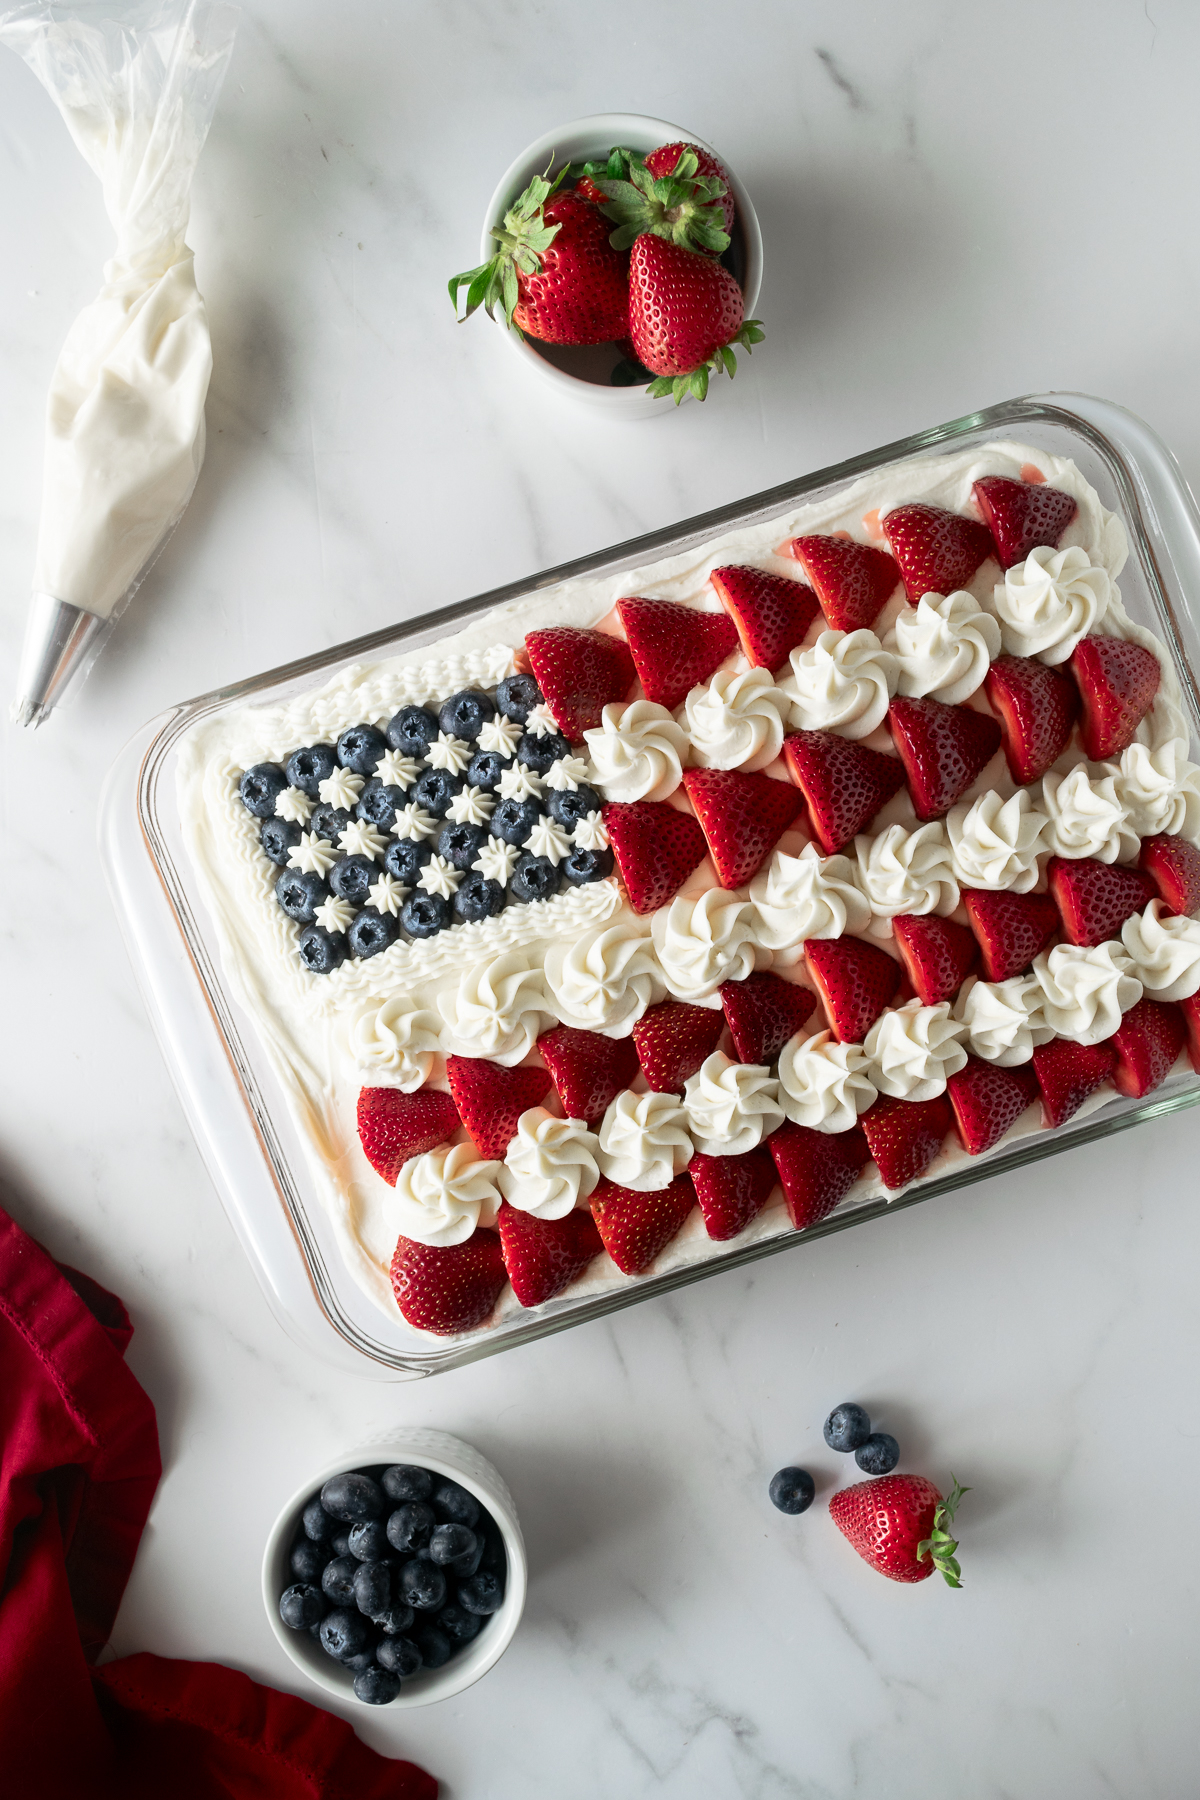 4th of July cake as American flag cake in a baking pan topped with strawberries and blueberries.